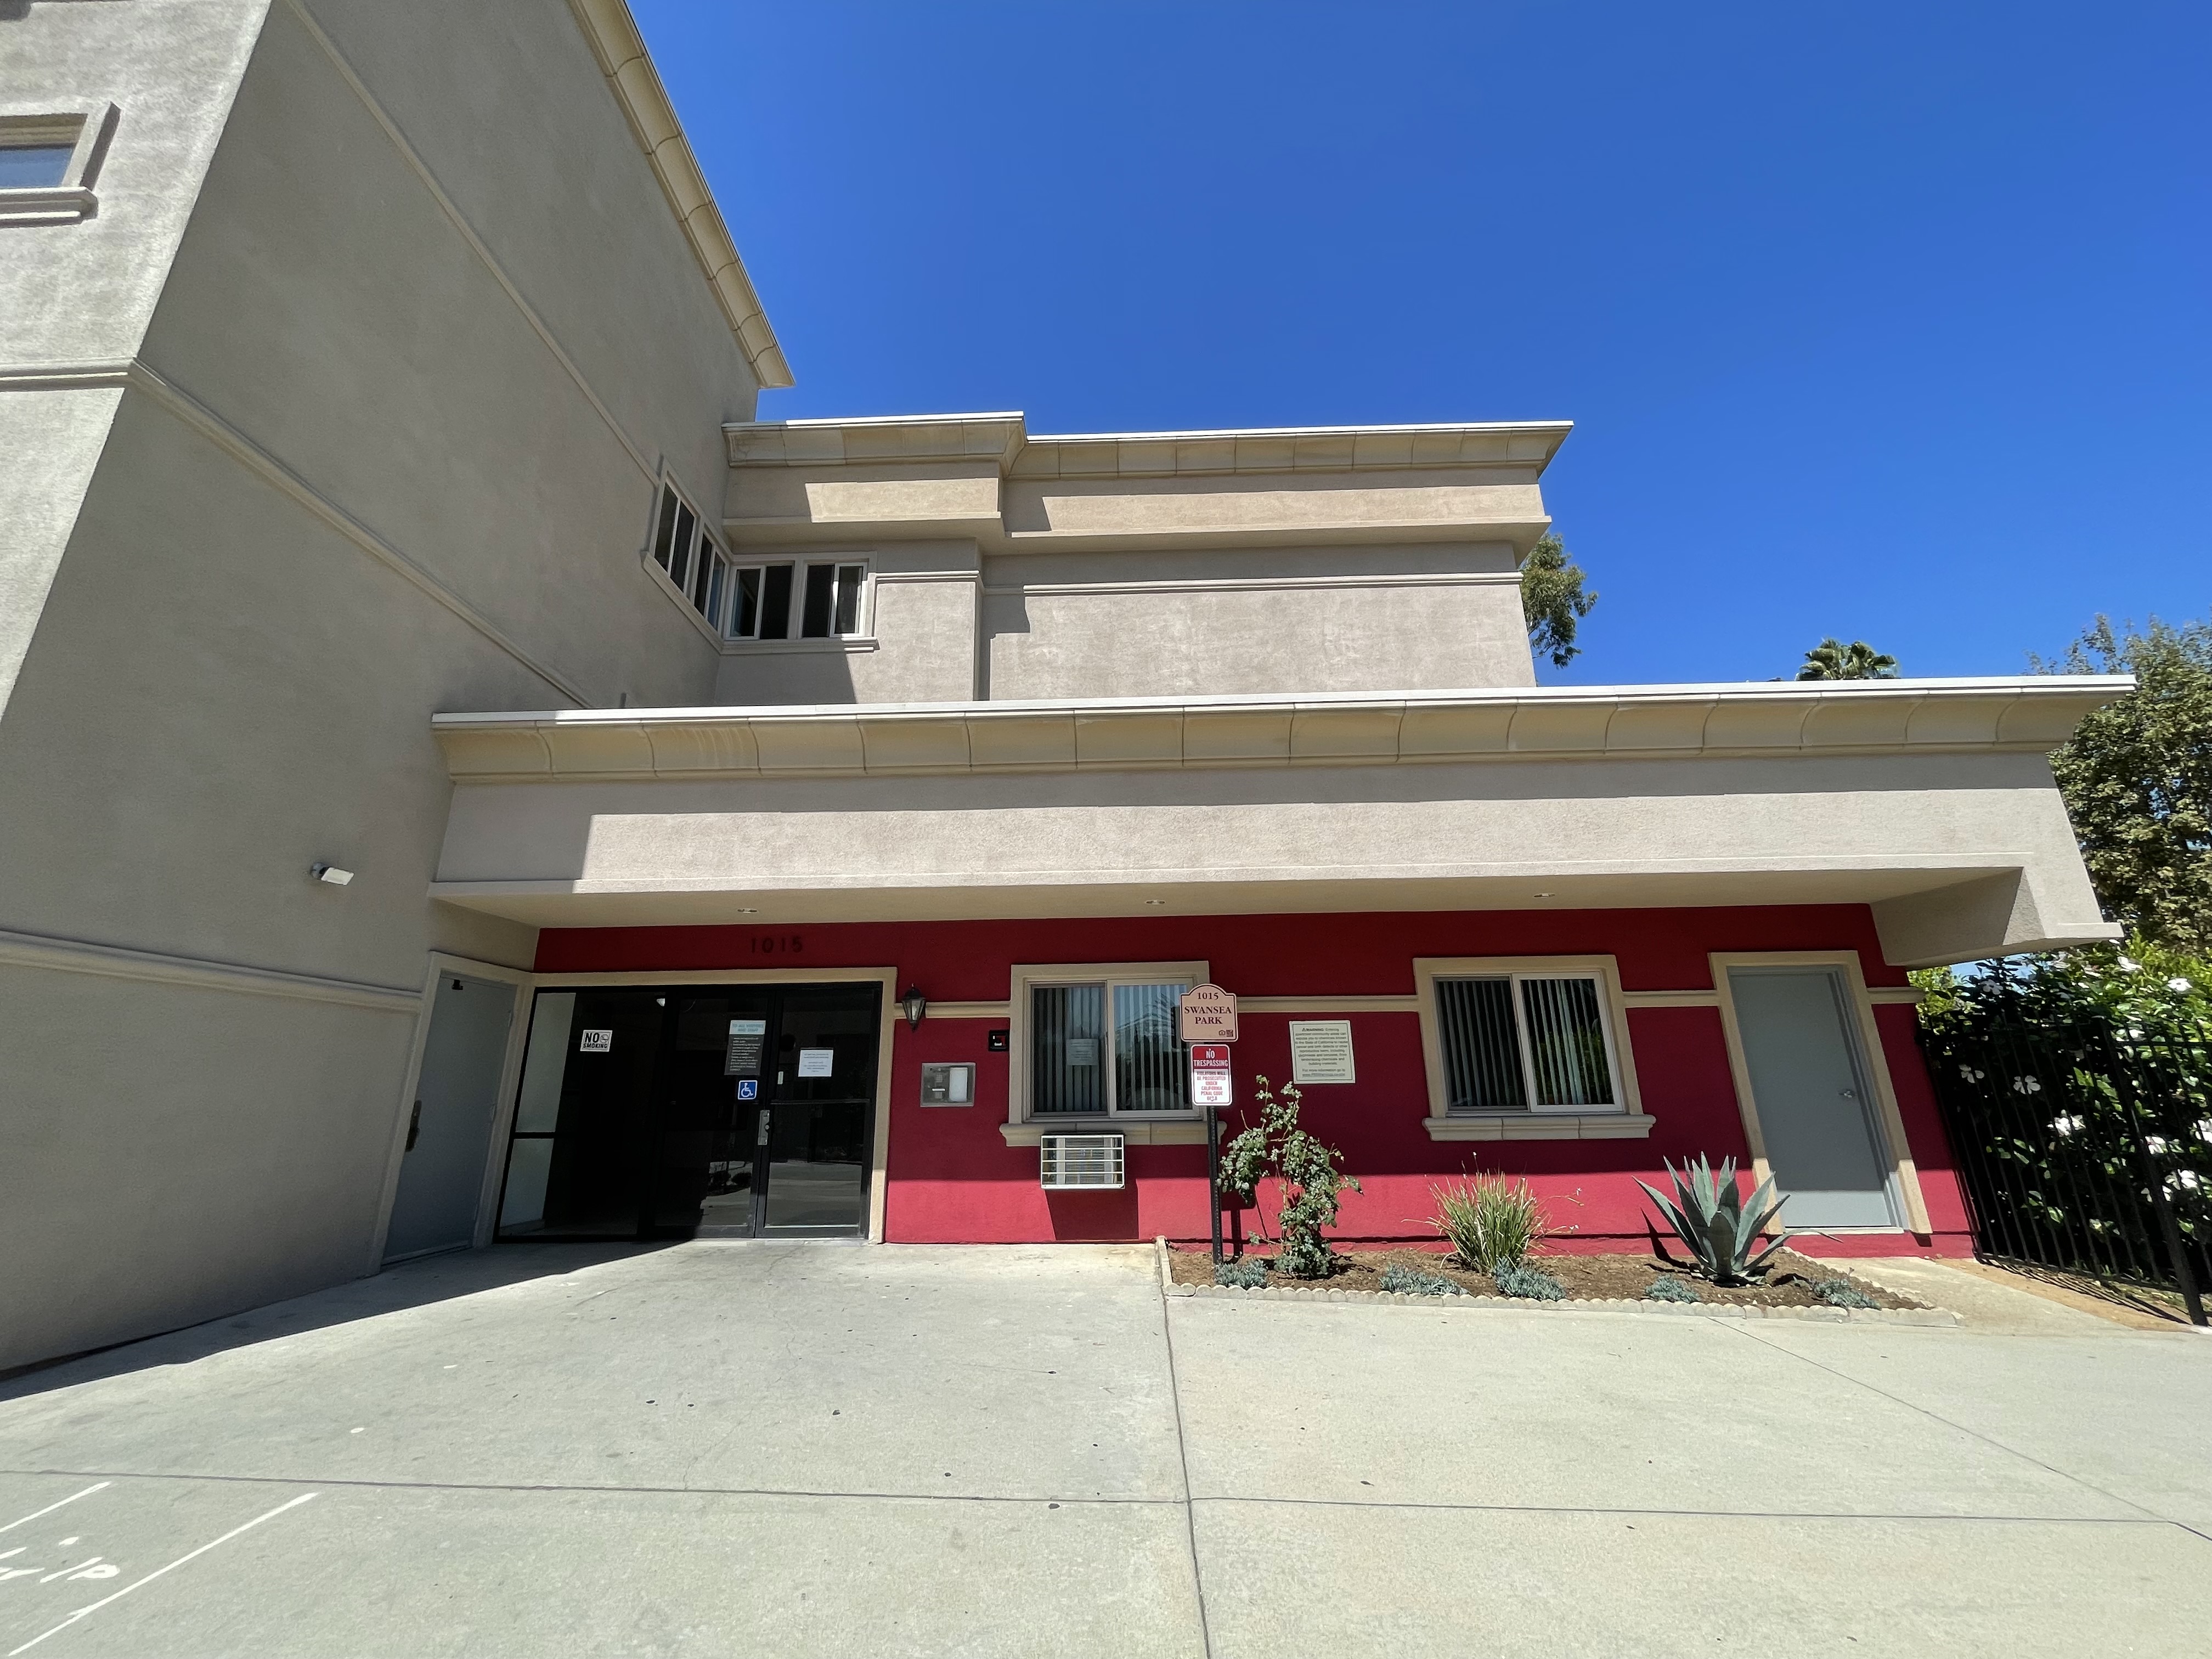 Photo showing the outside of the building entrance. Outside wall is red. Outside entrance also has windows and a glass door.